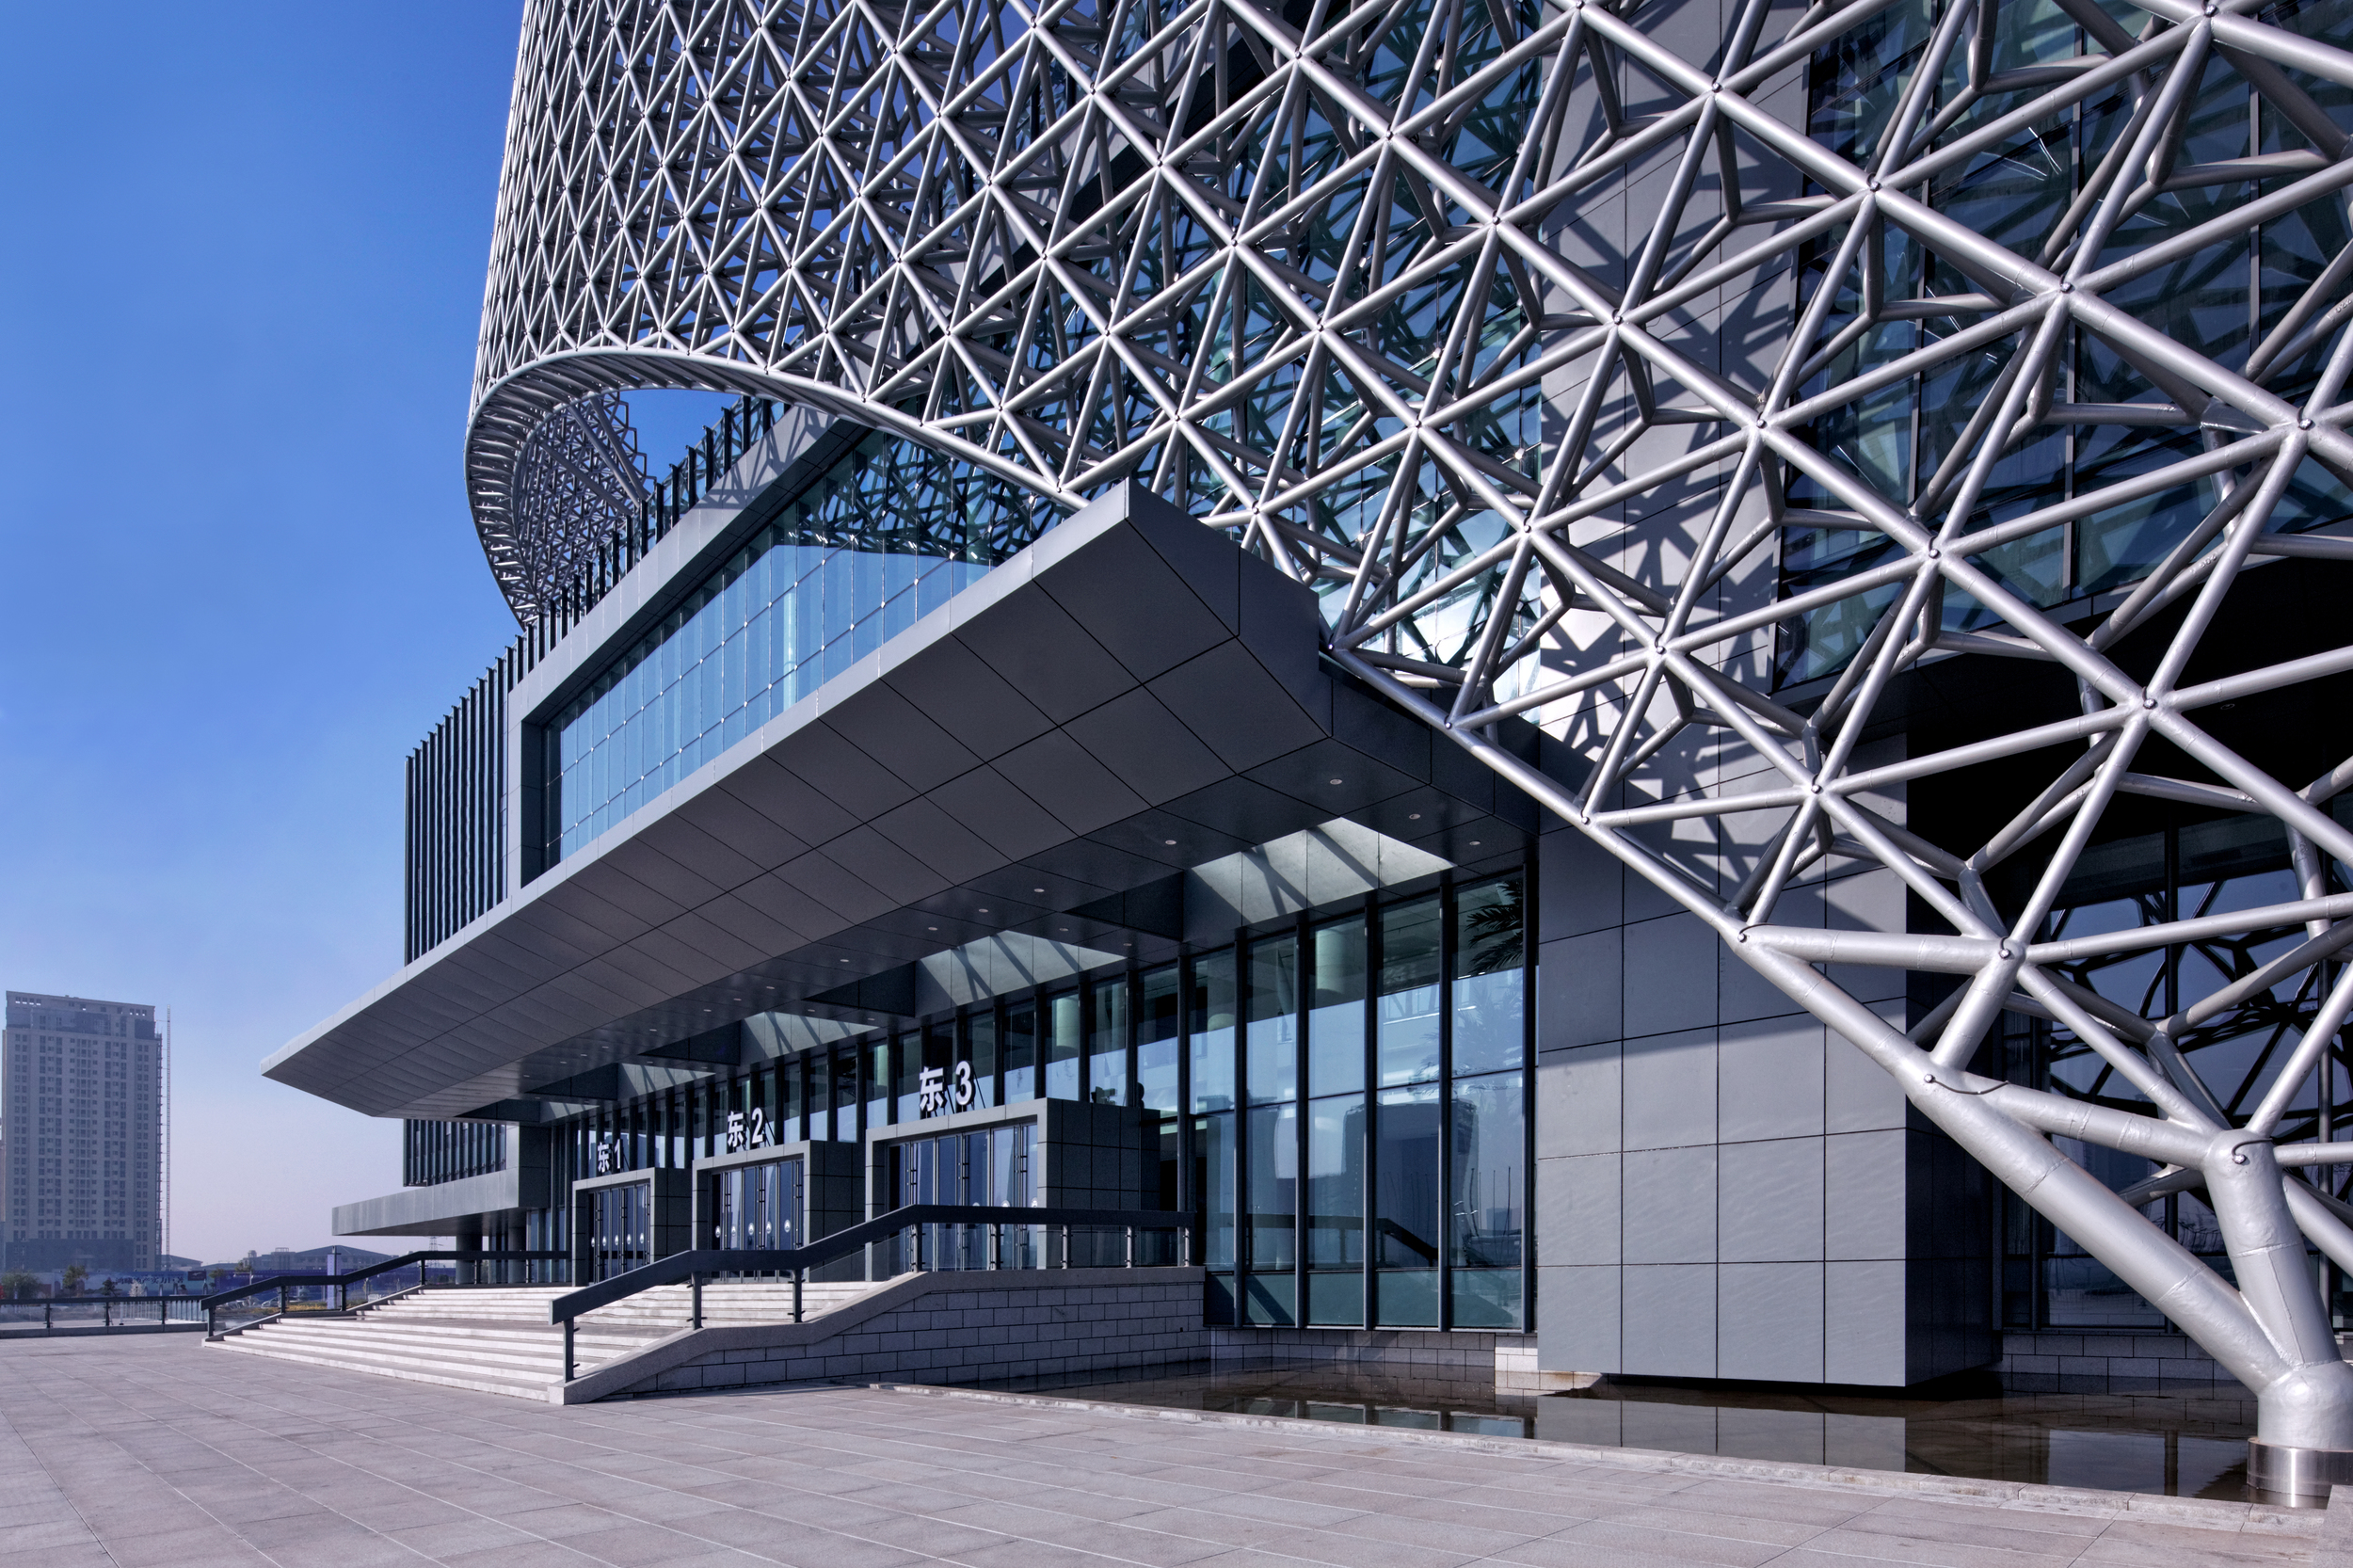 Ningxia International Conference Center (Photograph by © Paul Dingman)